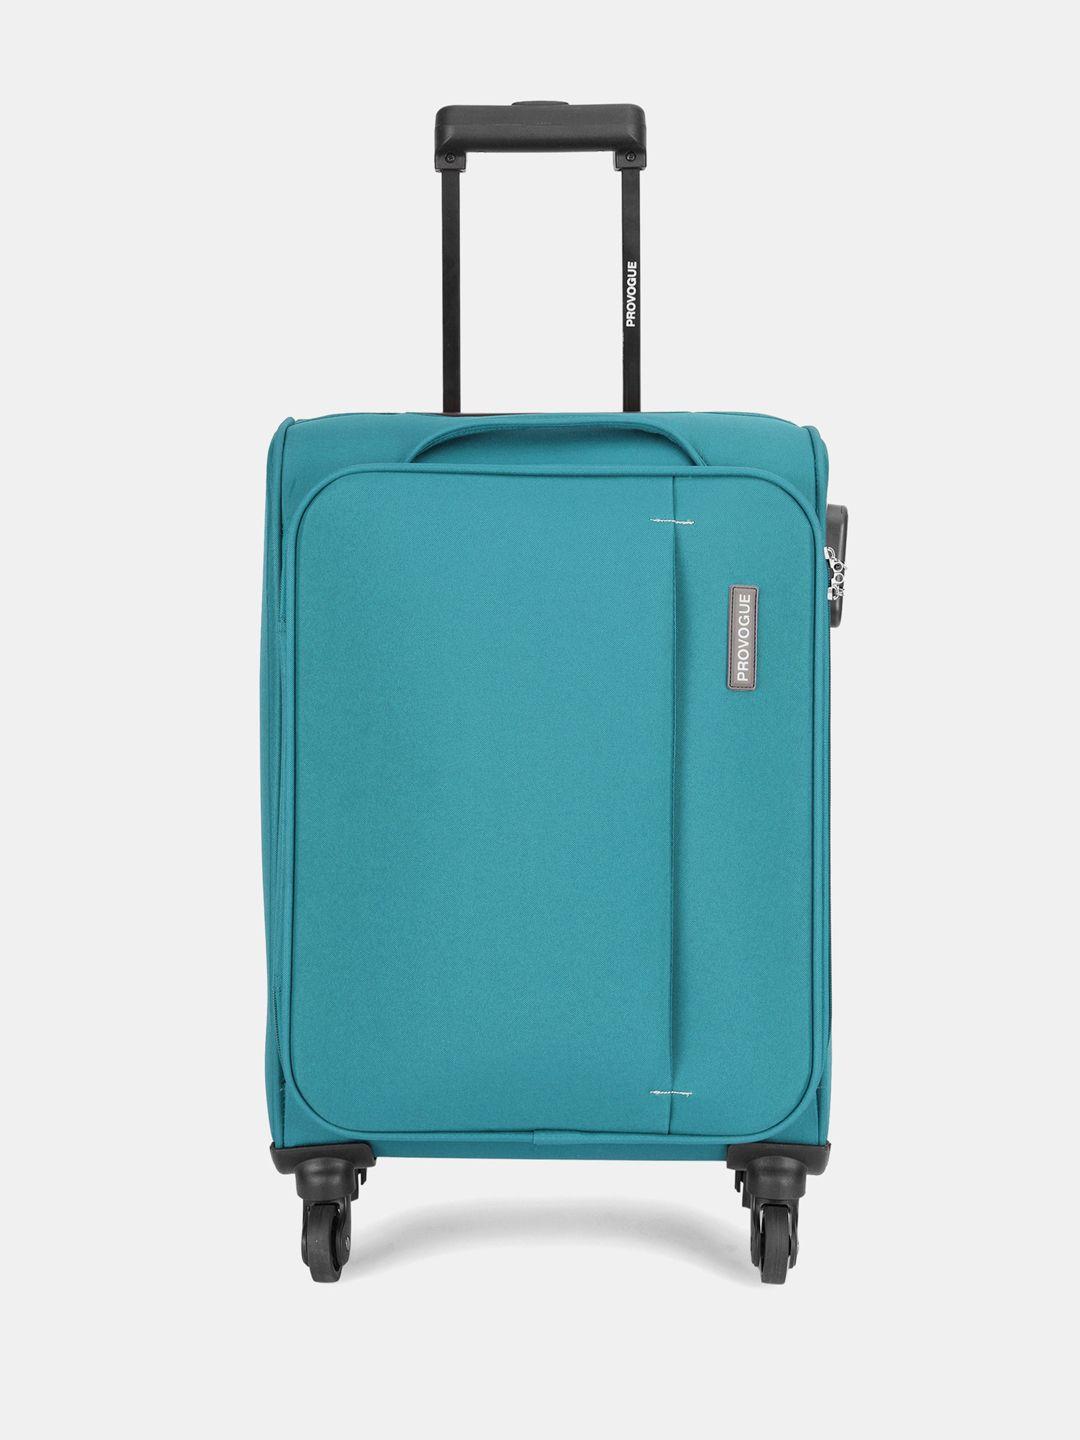 provogue soft body edge cabin trolley suitcase